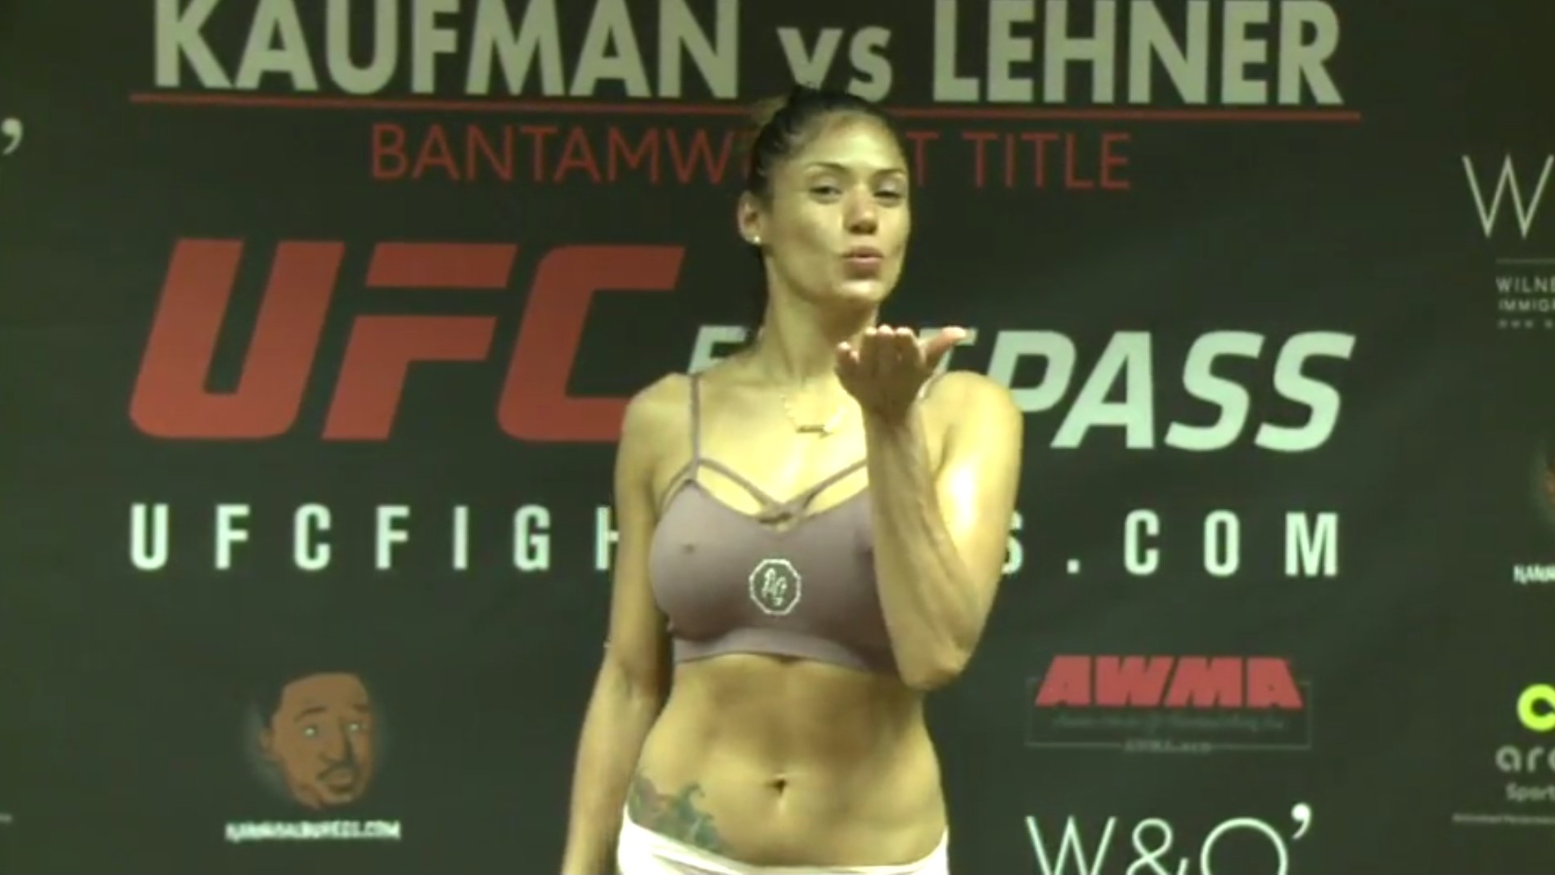 Invicta FC 29 weigh-in results: Kaufman vs. Lehner